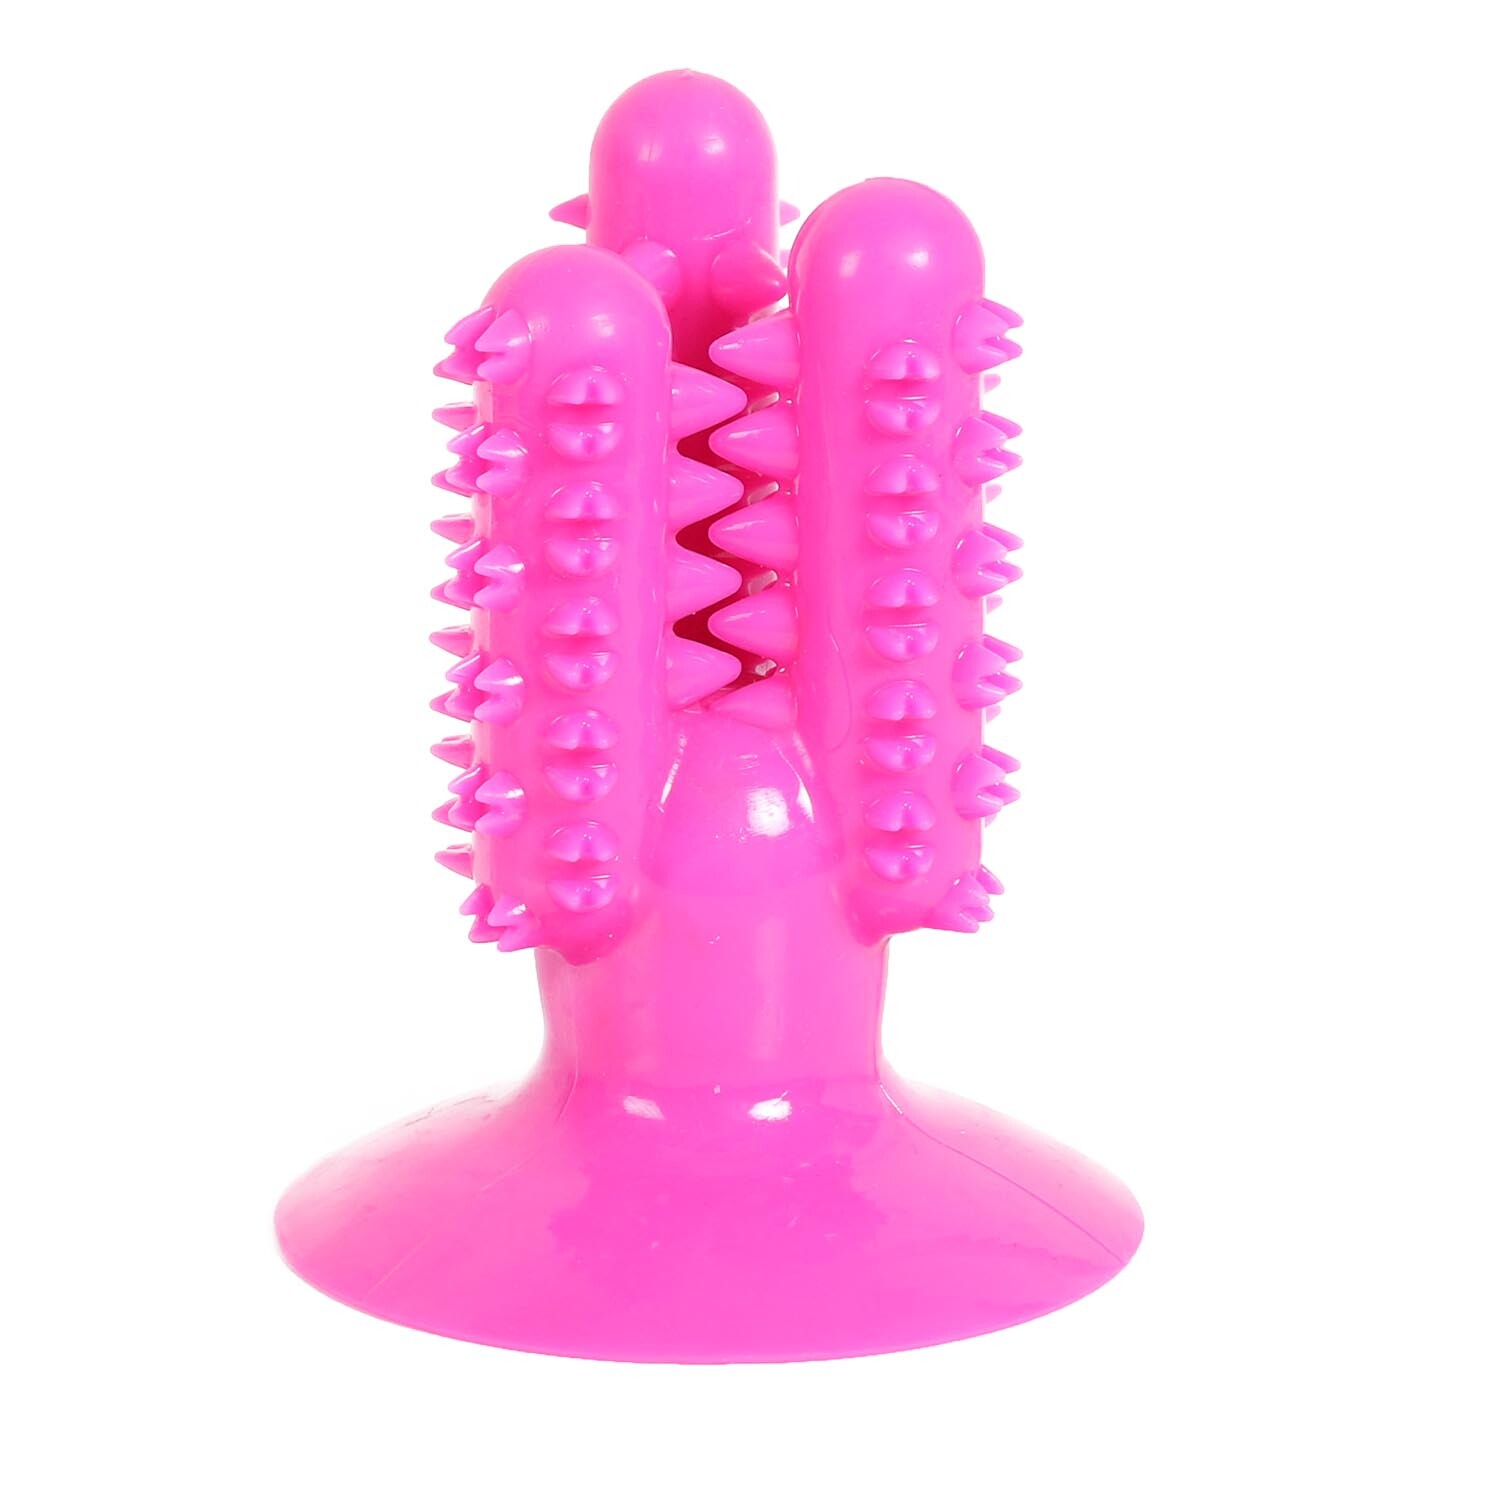 Clever Paws Cactus Dog Dental Toy Image 1